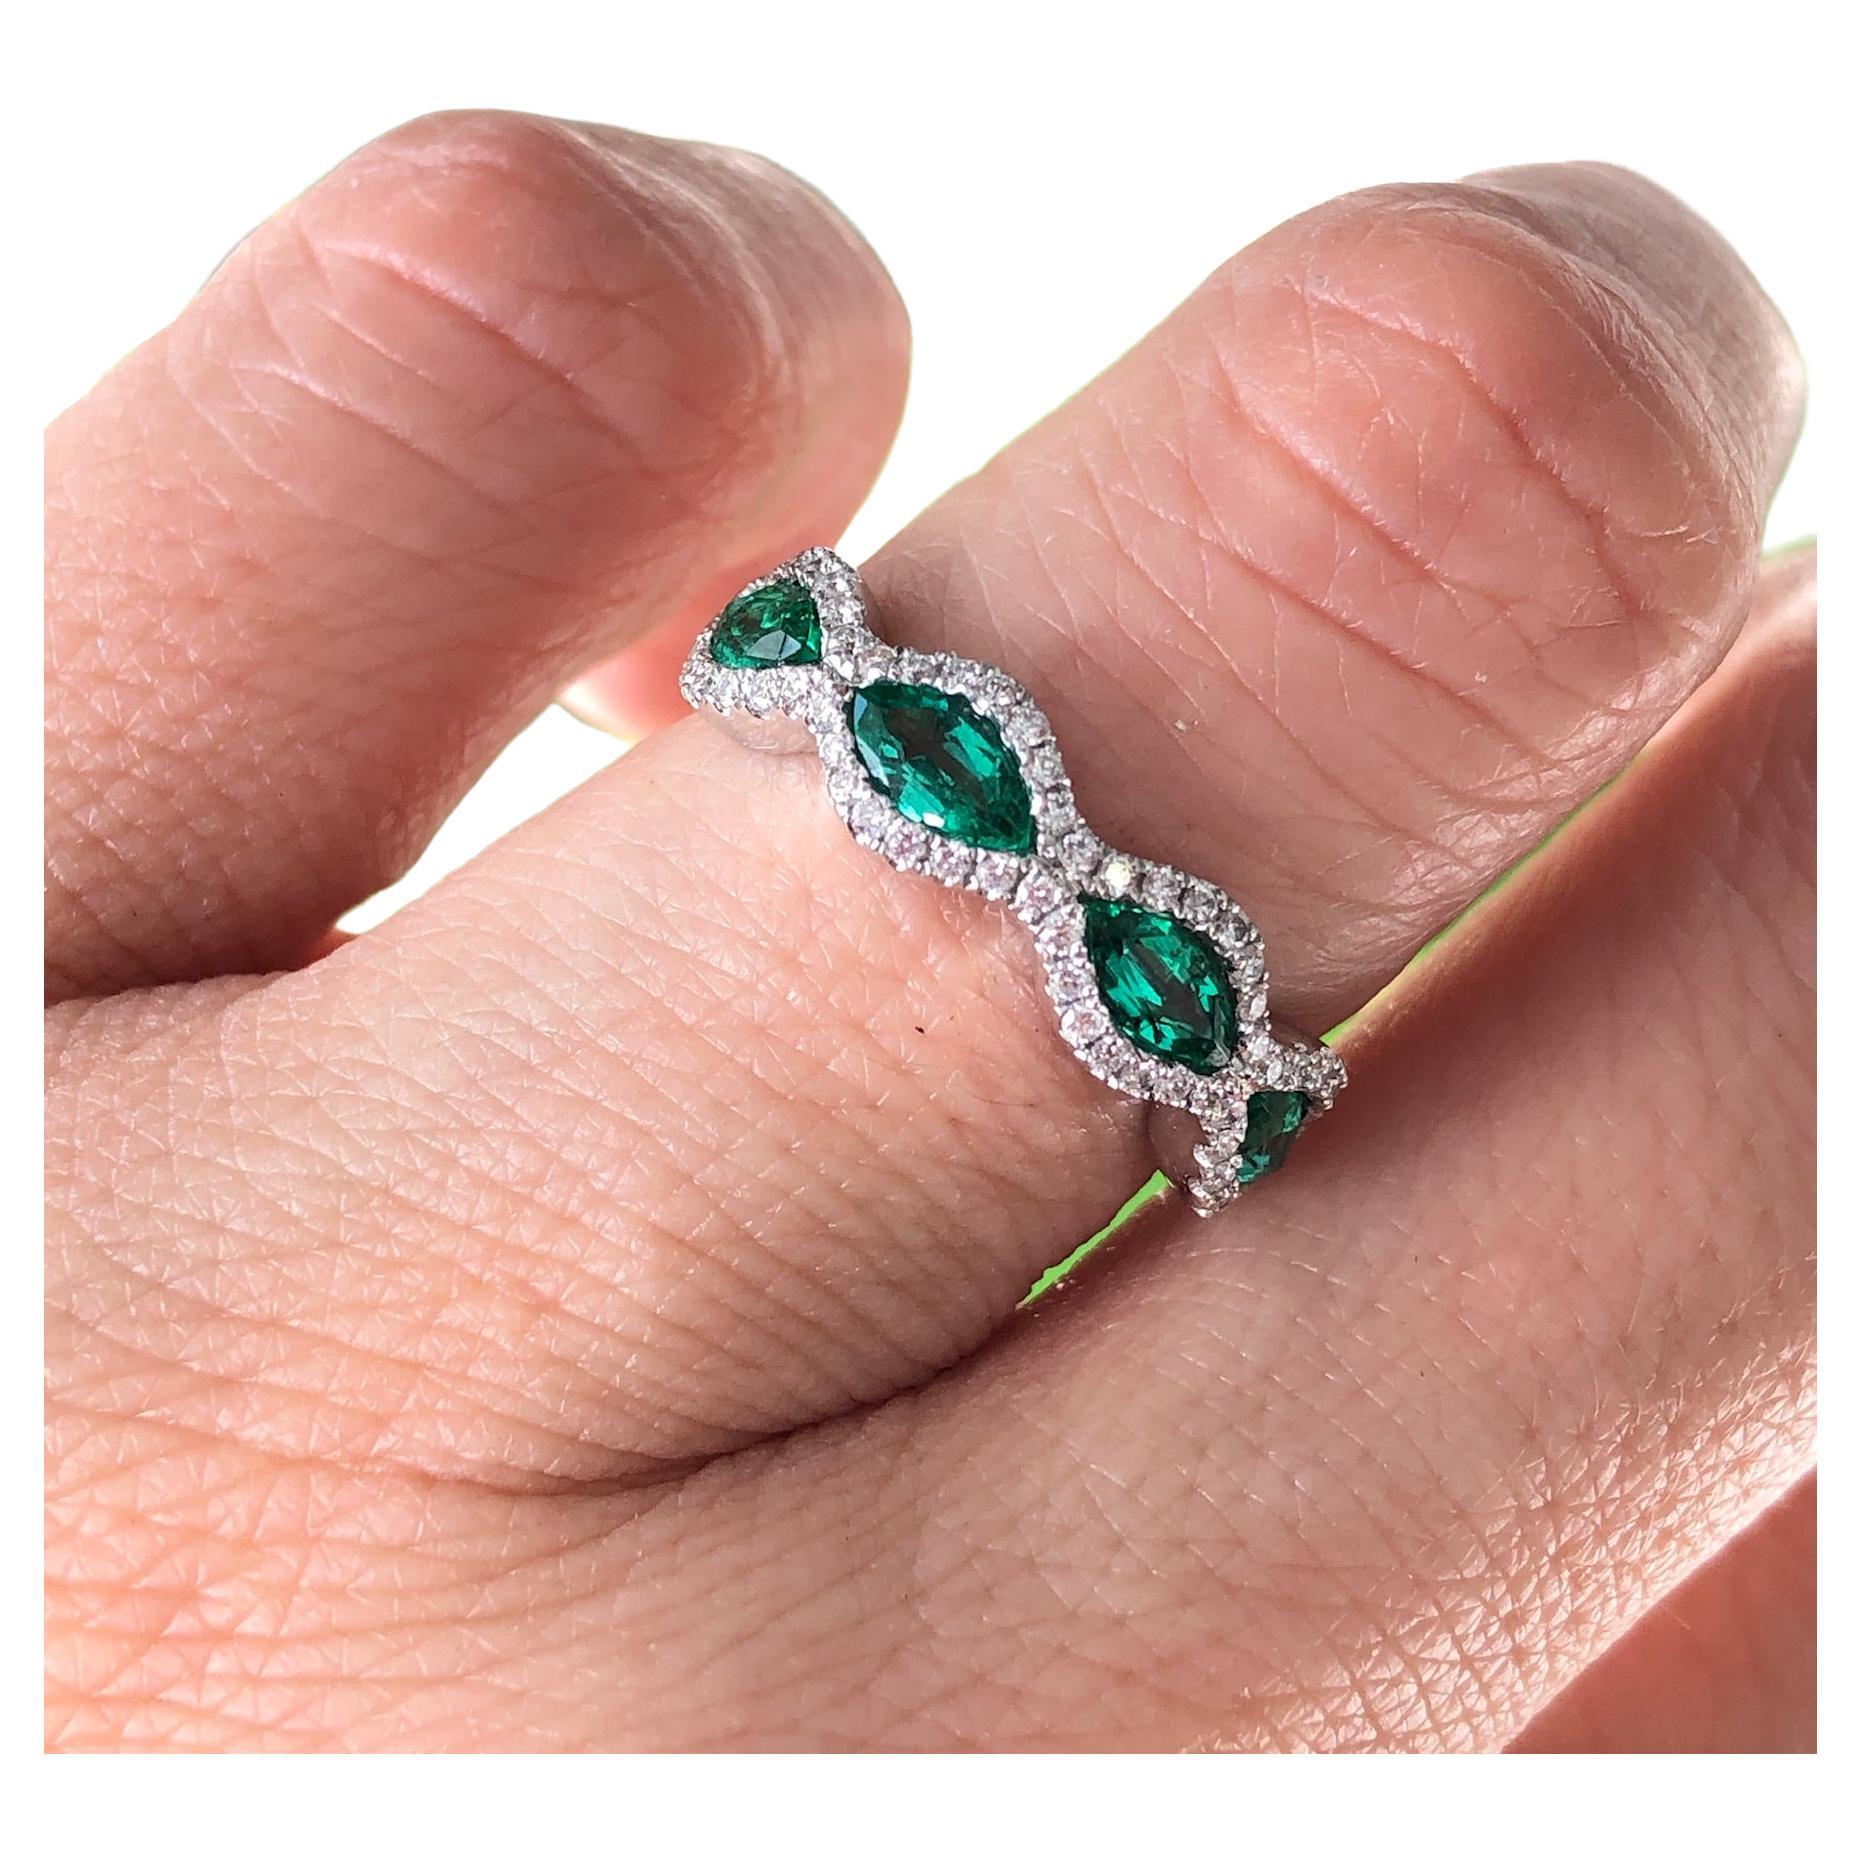 18K white gold, marquis emeralds and diamond ring, mounted east to west

Features
18K white gold mounting
.82 carat total weight marquis emeralds
.27 carat total weight in diamonds
Ring size 6, can be sized. 